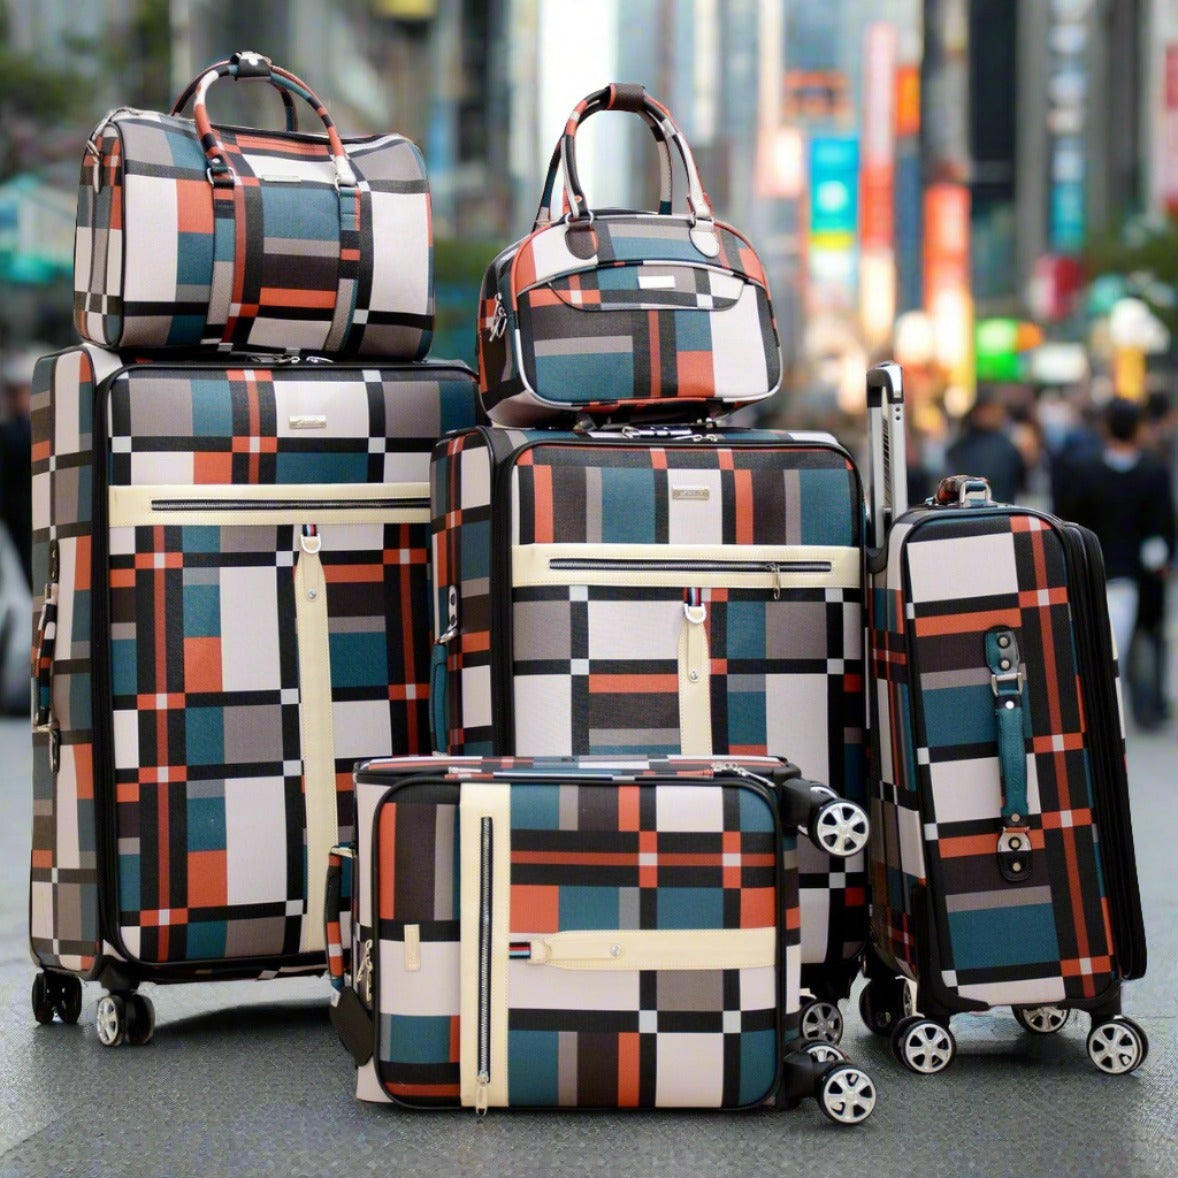 6 Piece Set 20" 24" 28" 32 Inches PU Leather Check Lightweight Spinner Wheel Luggage Bag